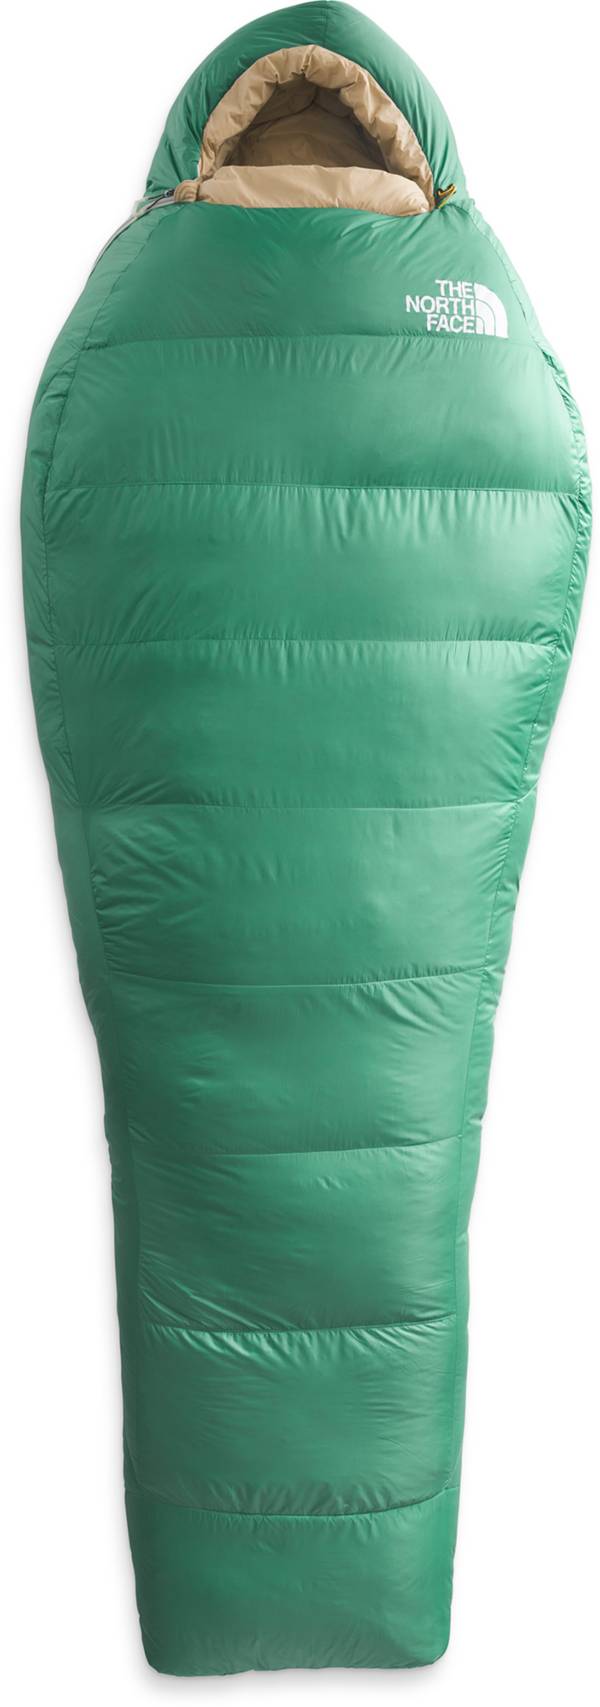 The North Face Trail Lite Down 0 Sleeping Bag product image